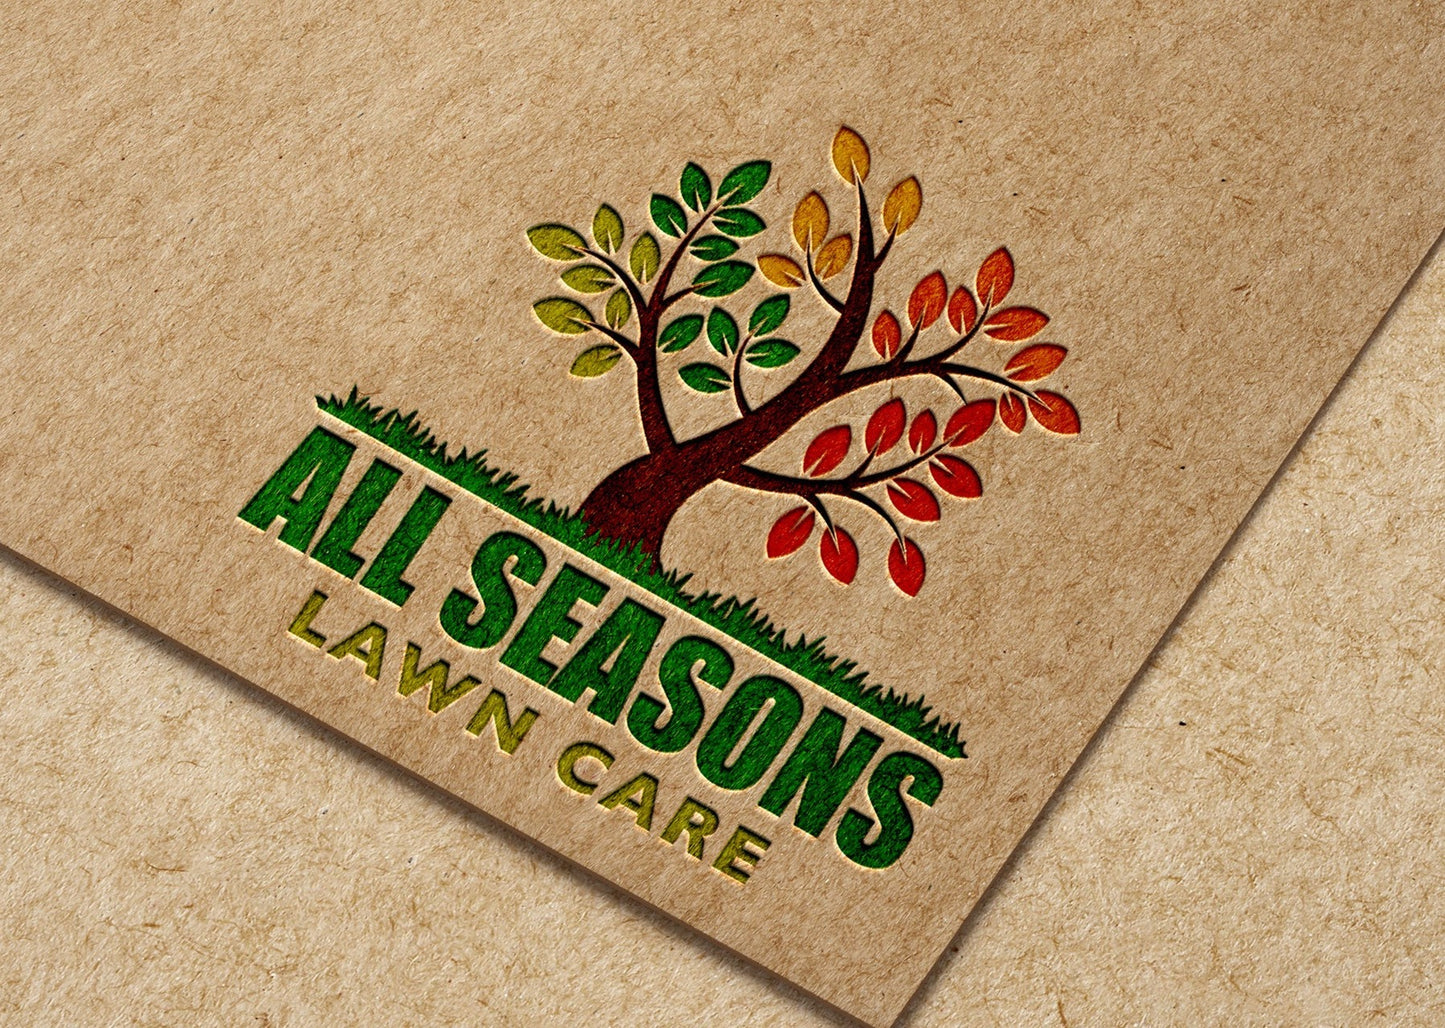 Logo Design - Landscaping Business | Lawn Care Company | Lawn Maintenance | Tree Service